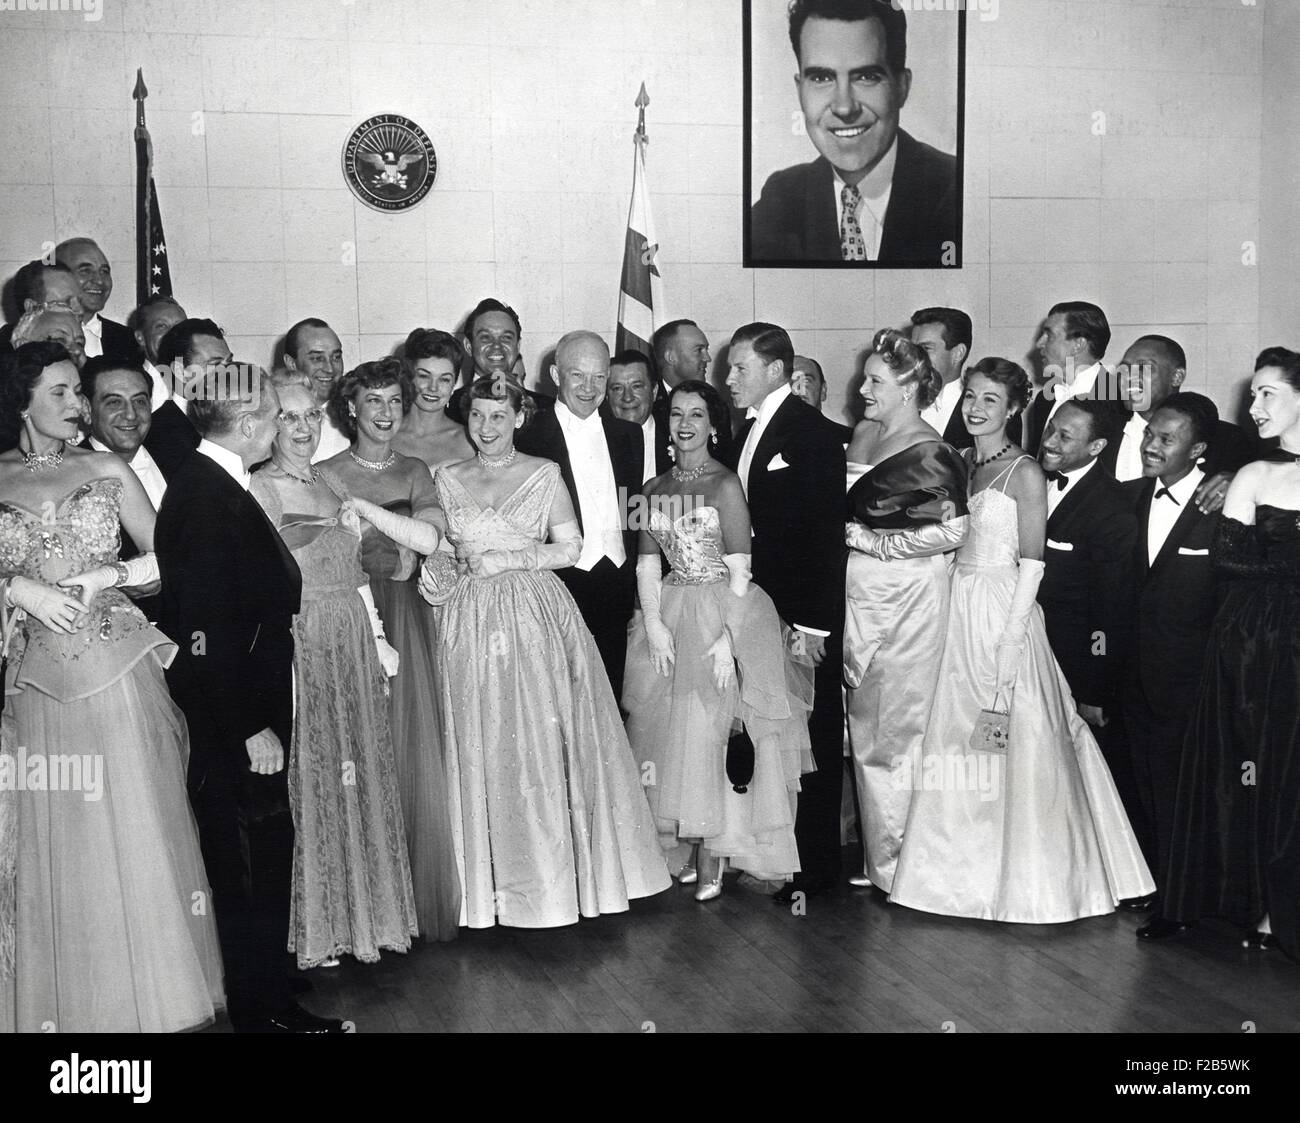 President Dwight and First Lady Mamie Eisenhower with guests attending the Inaugural Ball. Jan. 20, 1953. L-R: Guy Lombardo (standing behind an unidentified woman), Fred Waring (facing Mrs. Doud), Mrs. Elvira Doud, Jeanette MacDonald, Mamie Eisenhower, the President, Lily Pons, and George Murphy - (BSLOC 2014 16 29) Stock Photo